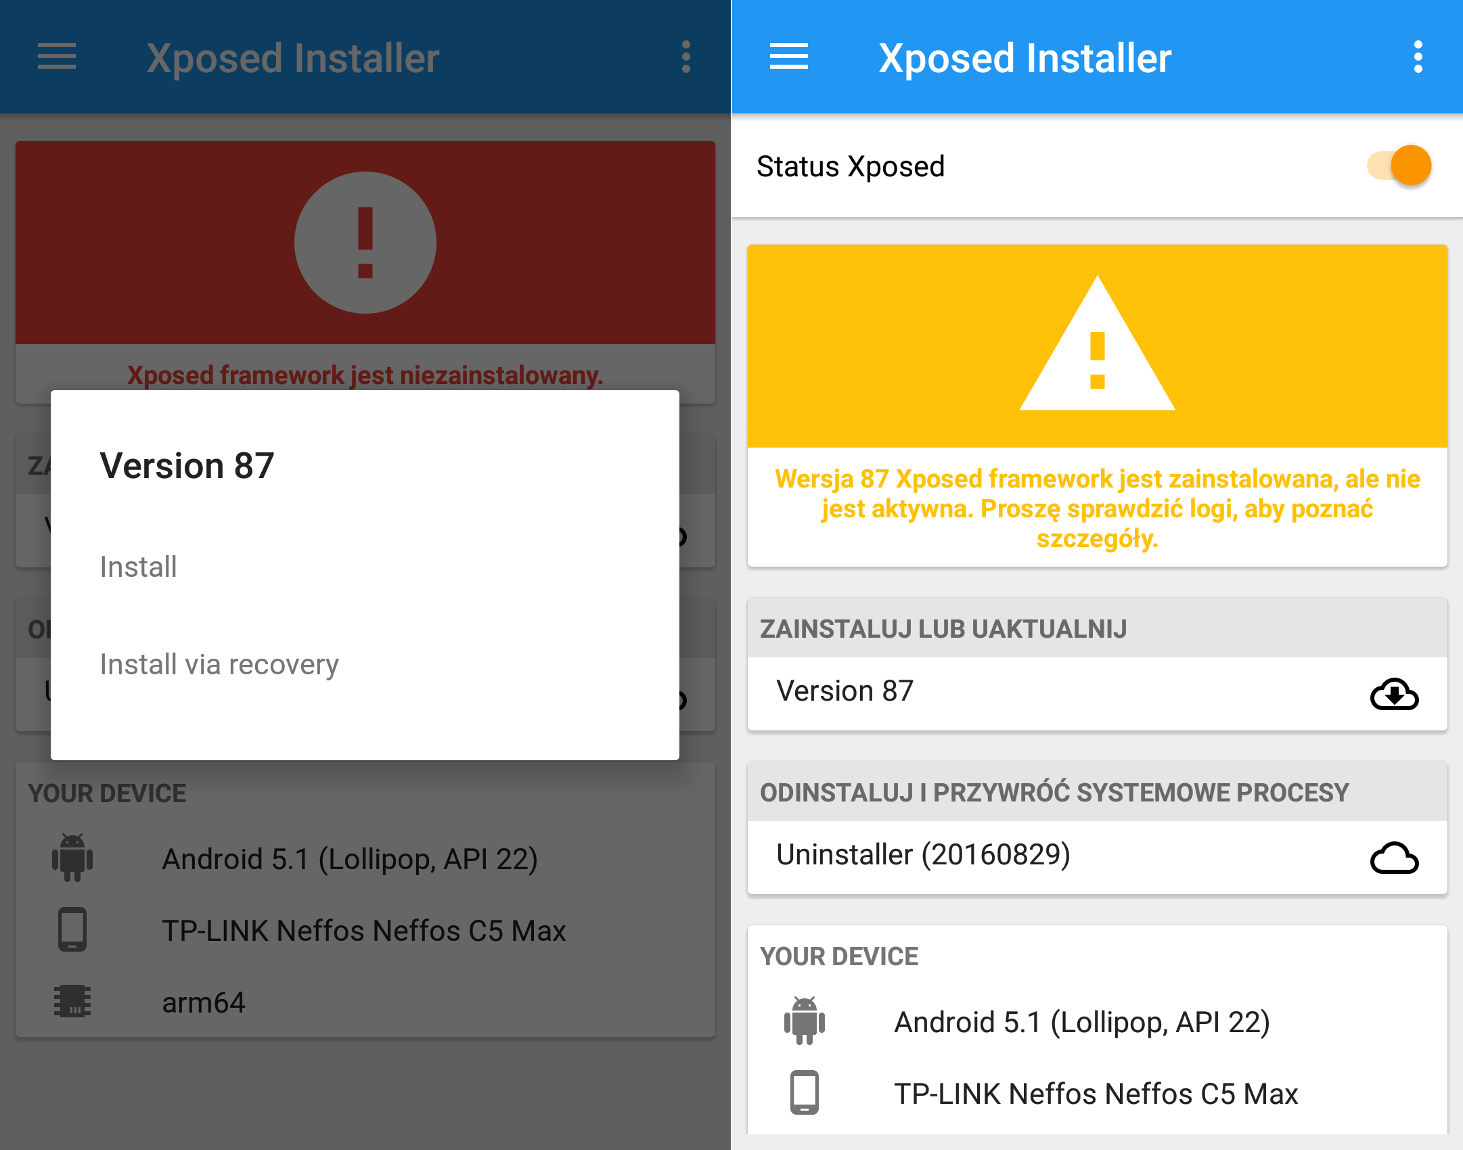 xposed-android-lollipop-marshmalow-tp-link-smartfon-neffos-c5-max-bledy